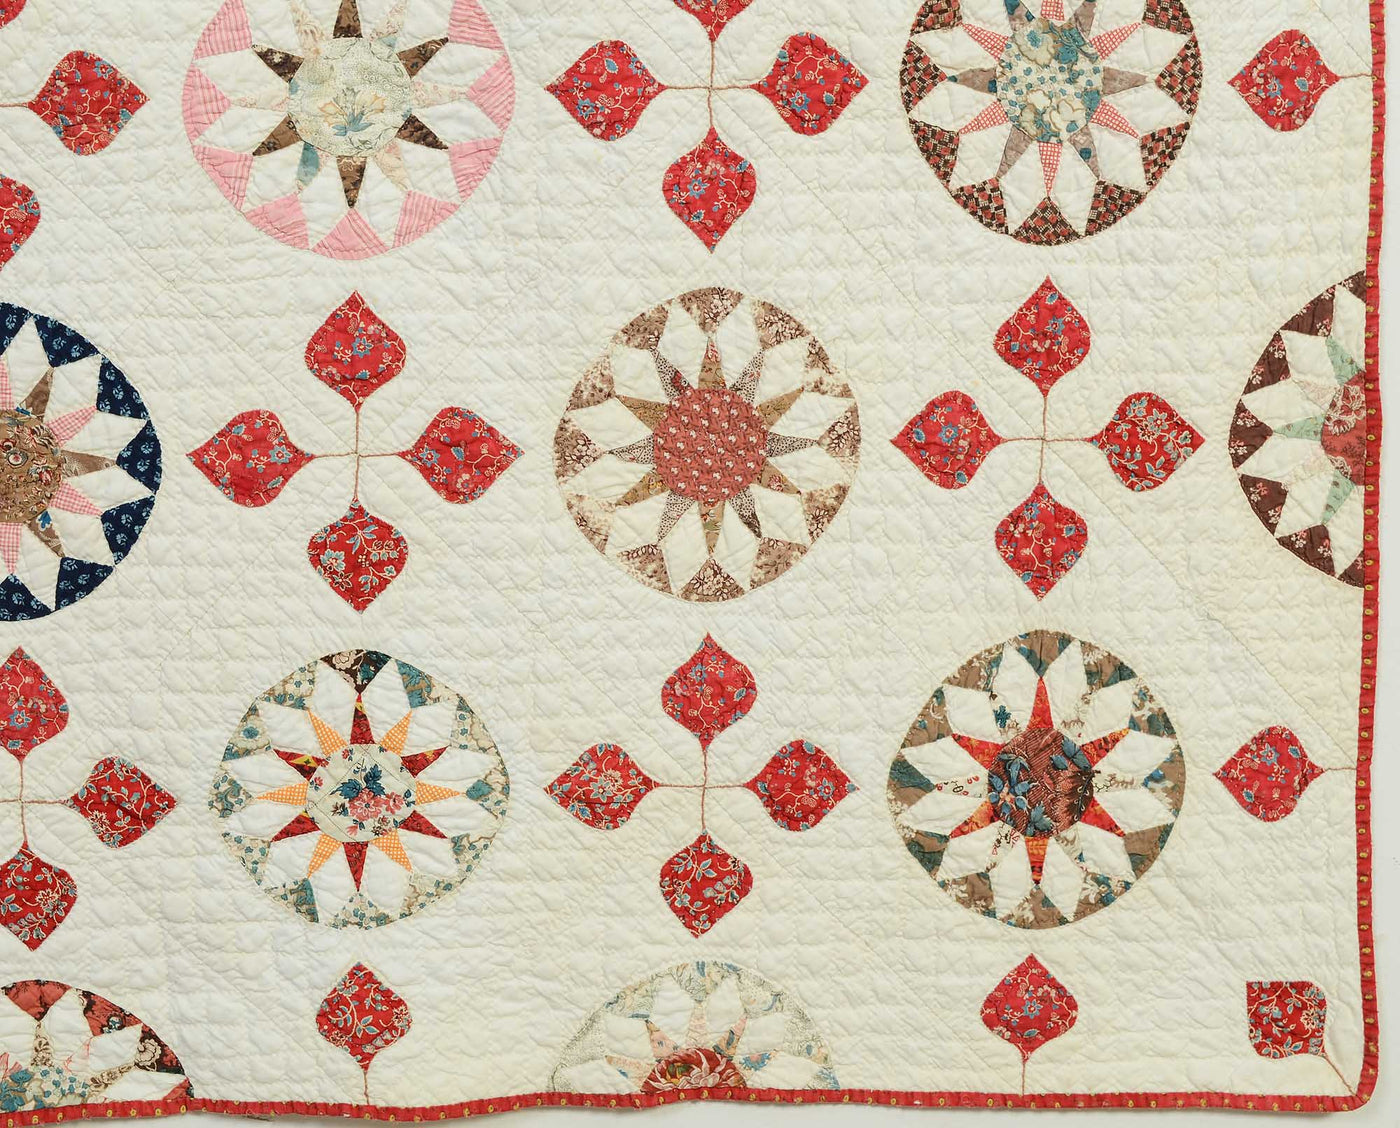 rising-sun-and-hearts-quilt-1453402-detail-6